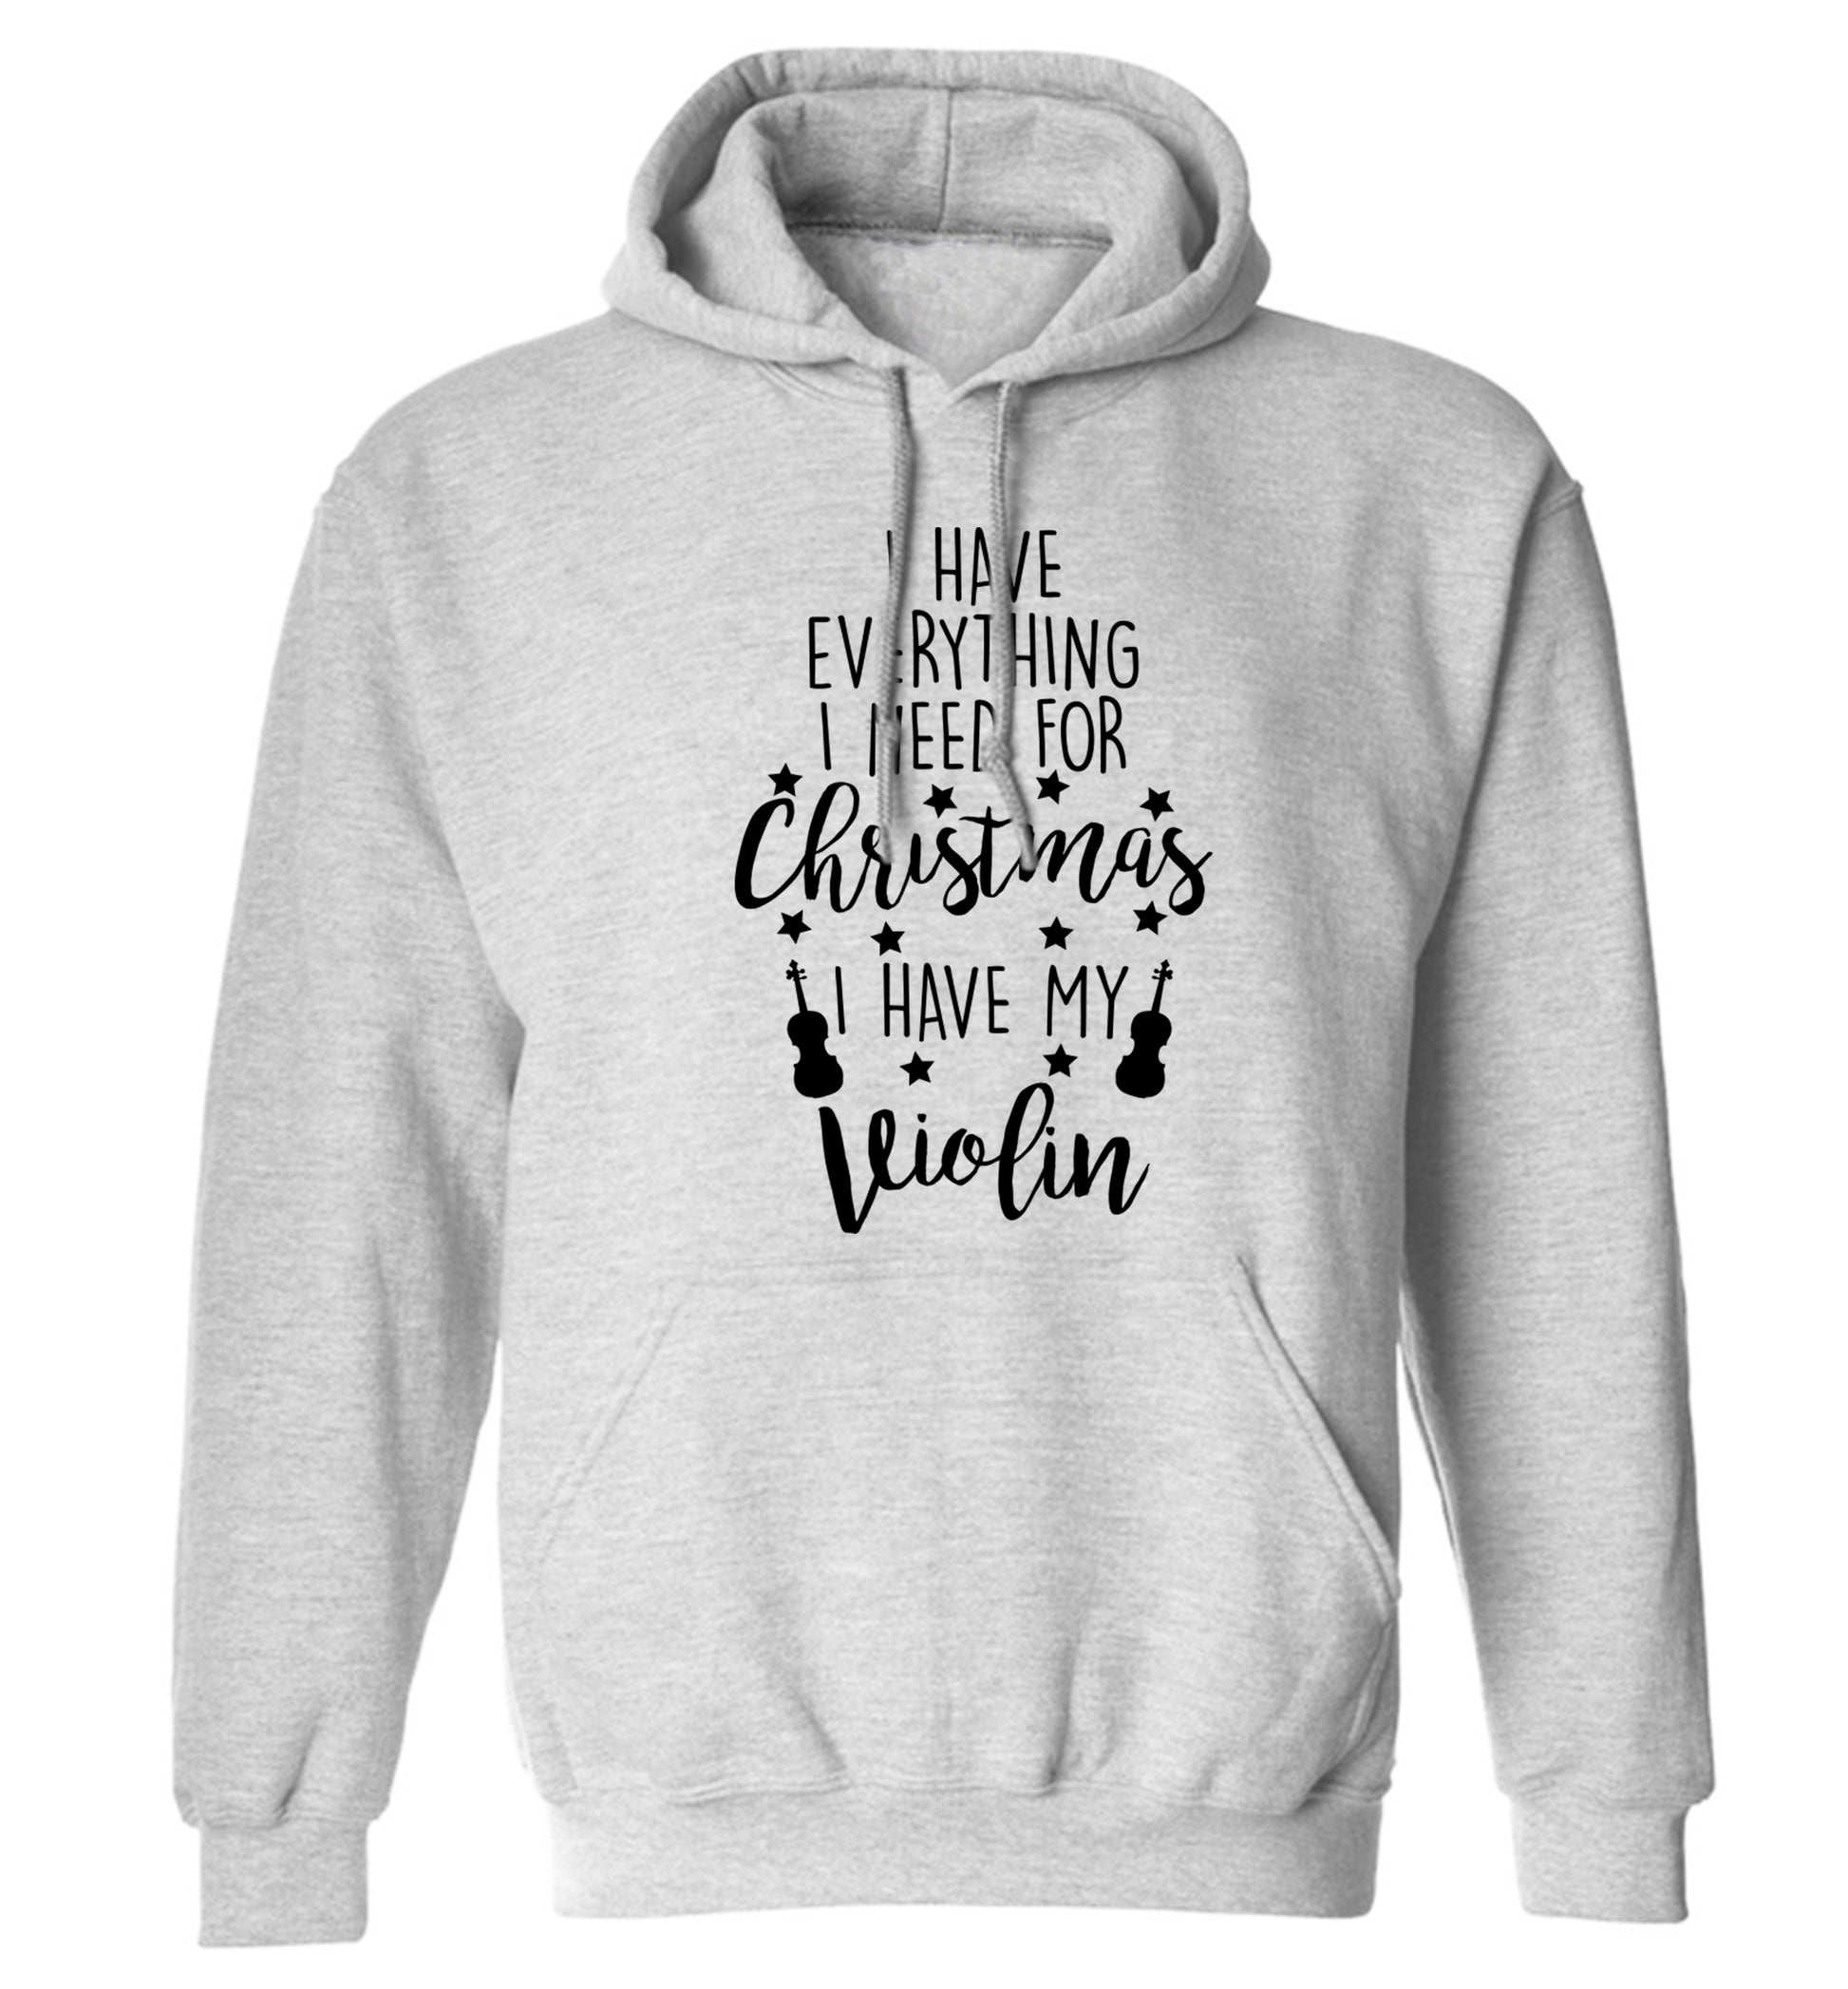 I have everything I need for Christmas I have my violin adults unisex grey hoodie 2XL